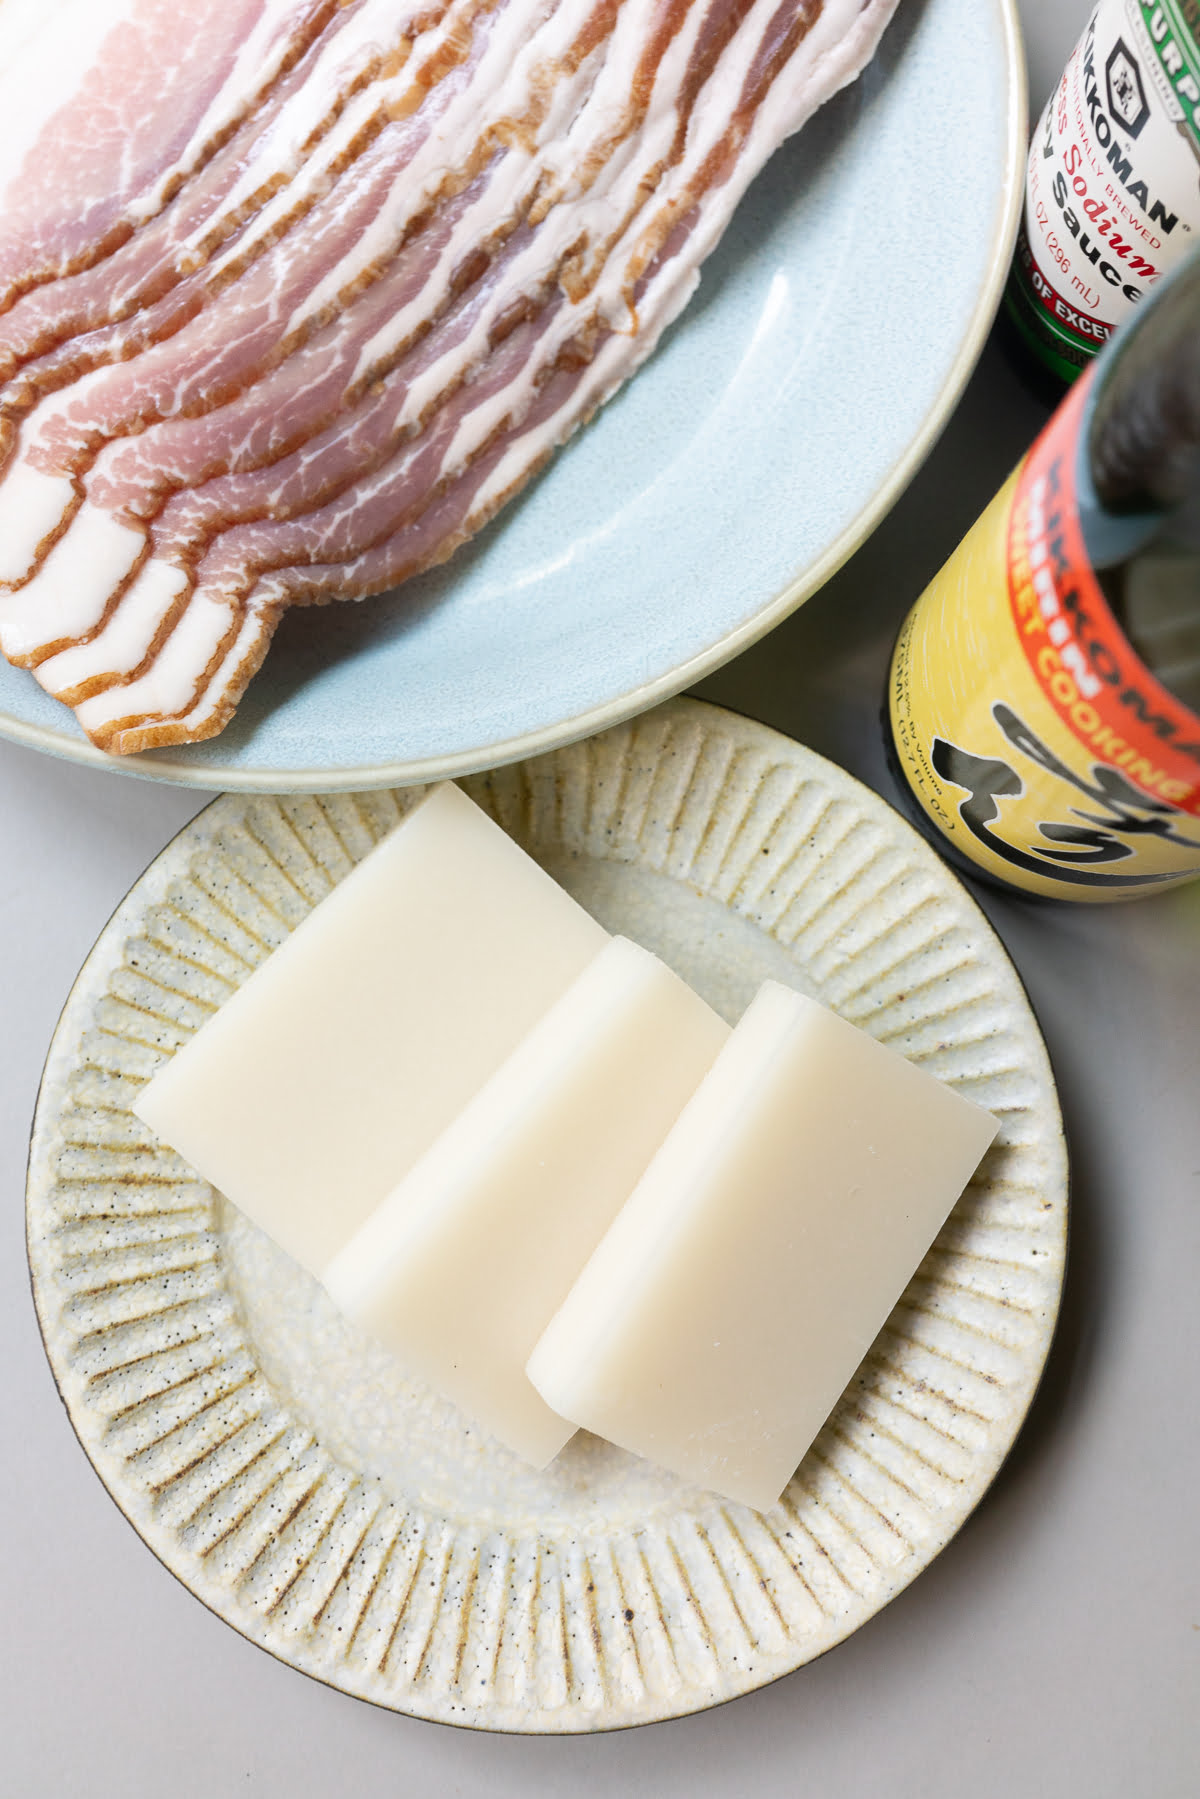 Ingredients for bacon wrapped mochi (bacon, mochi, soy sauce, and mirin).